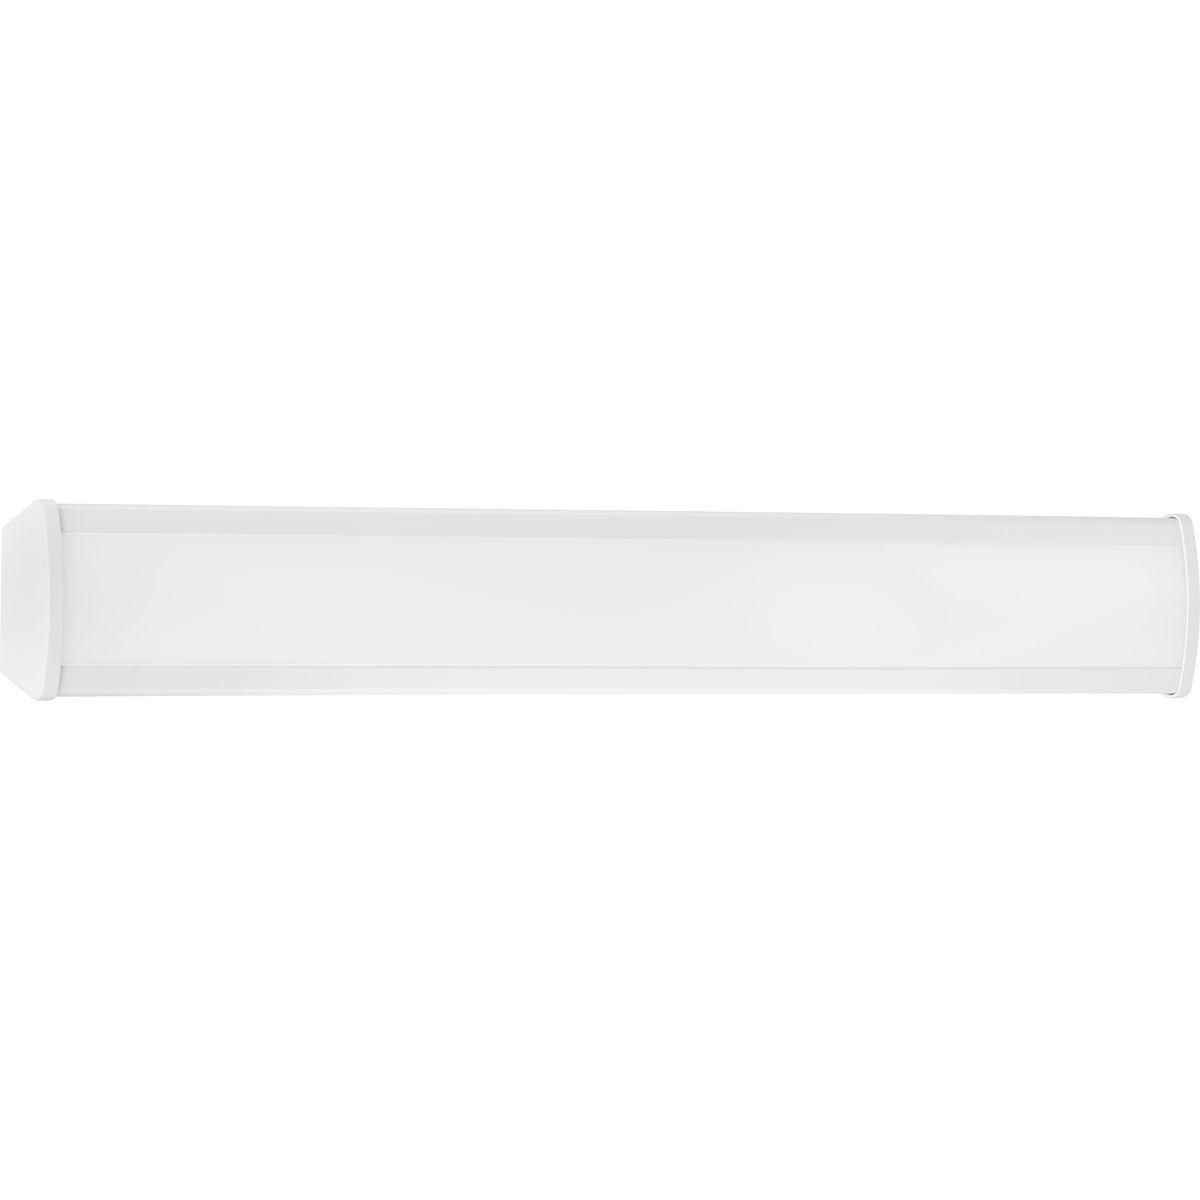 Hubbell P730012-030-30 The Wrap and Strip Collection's Four-Foot LED Wrap Light features a crisp white acrylic diffuser shaped into an elegant elongated tubular silhouette. The light fixture is complemented by white end caps and a white metal chassis. The wrap light can be moun